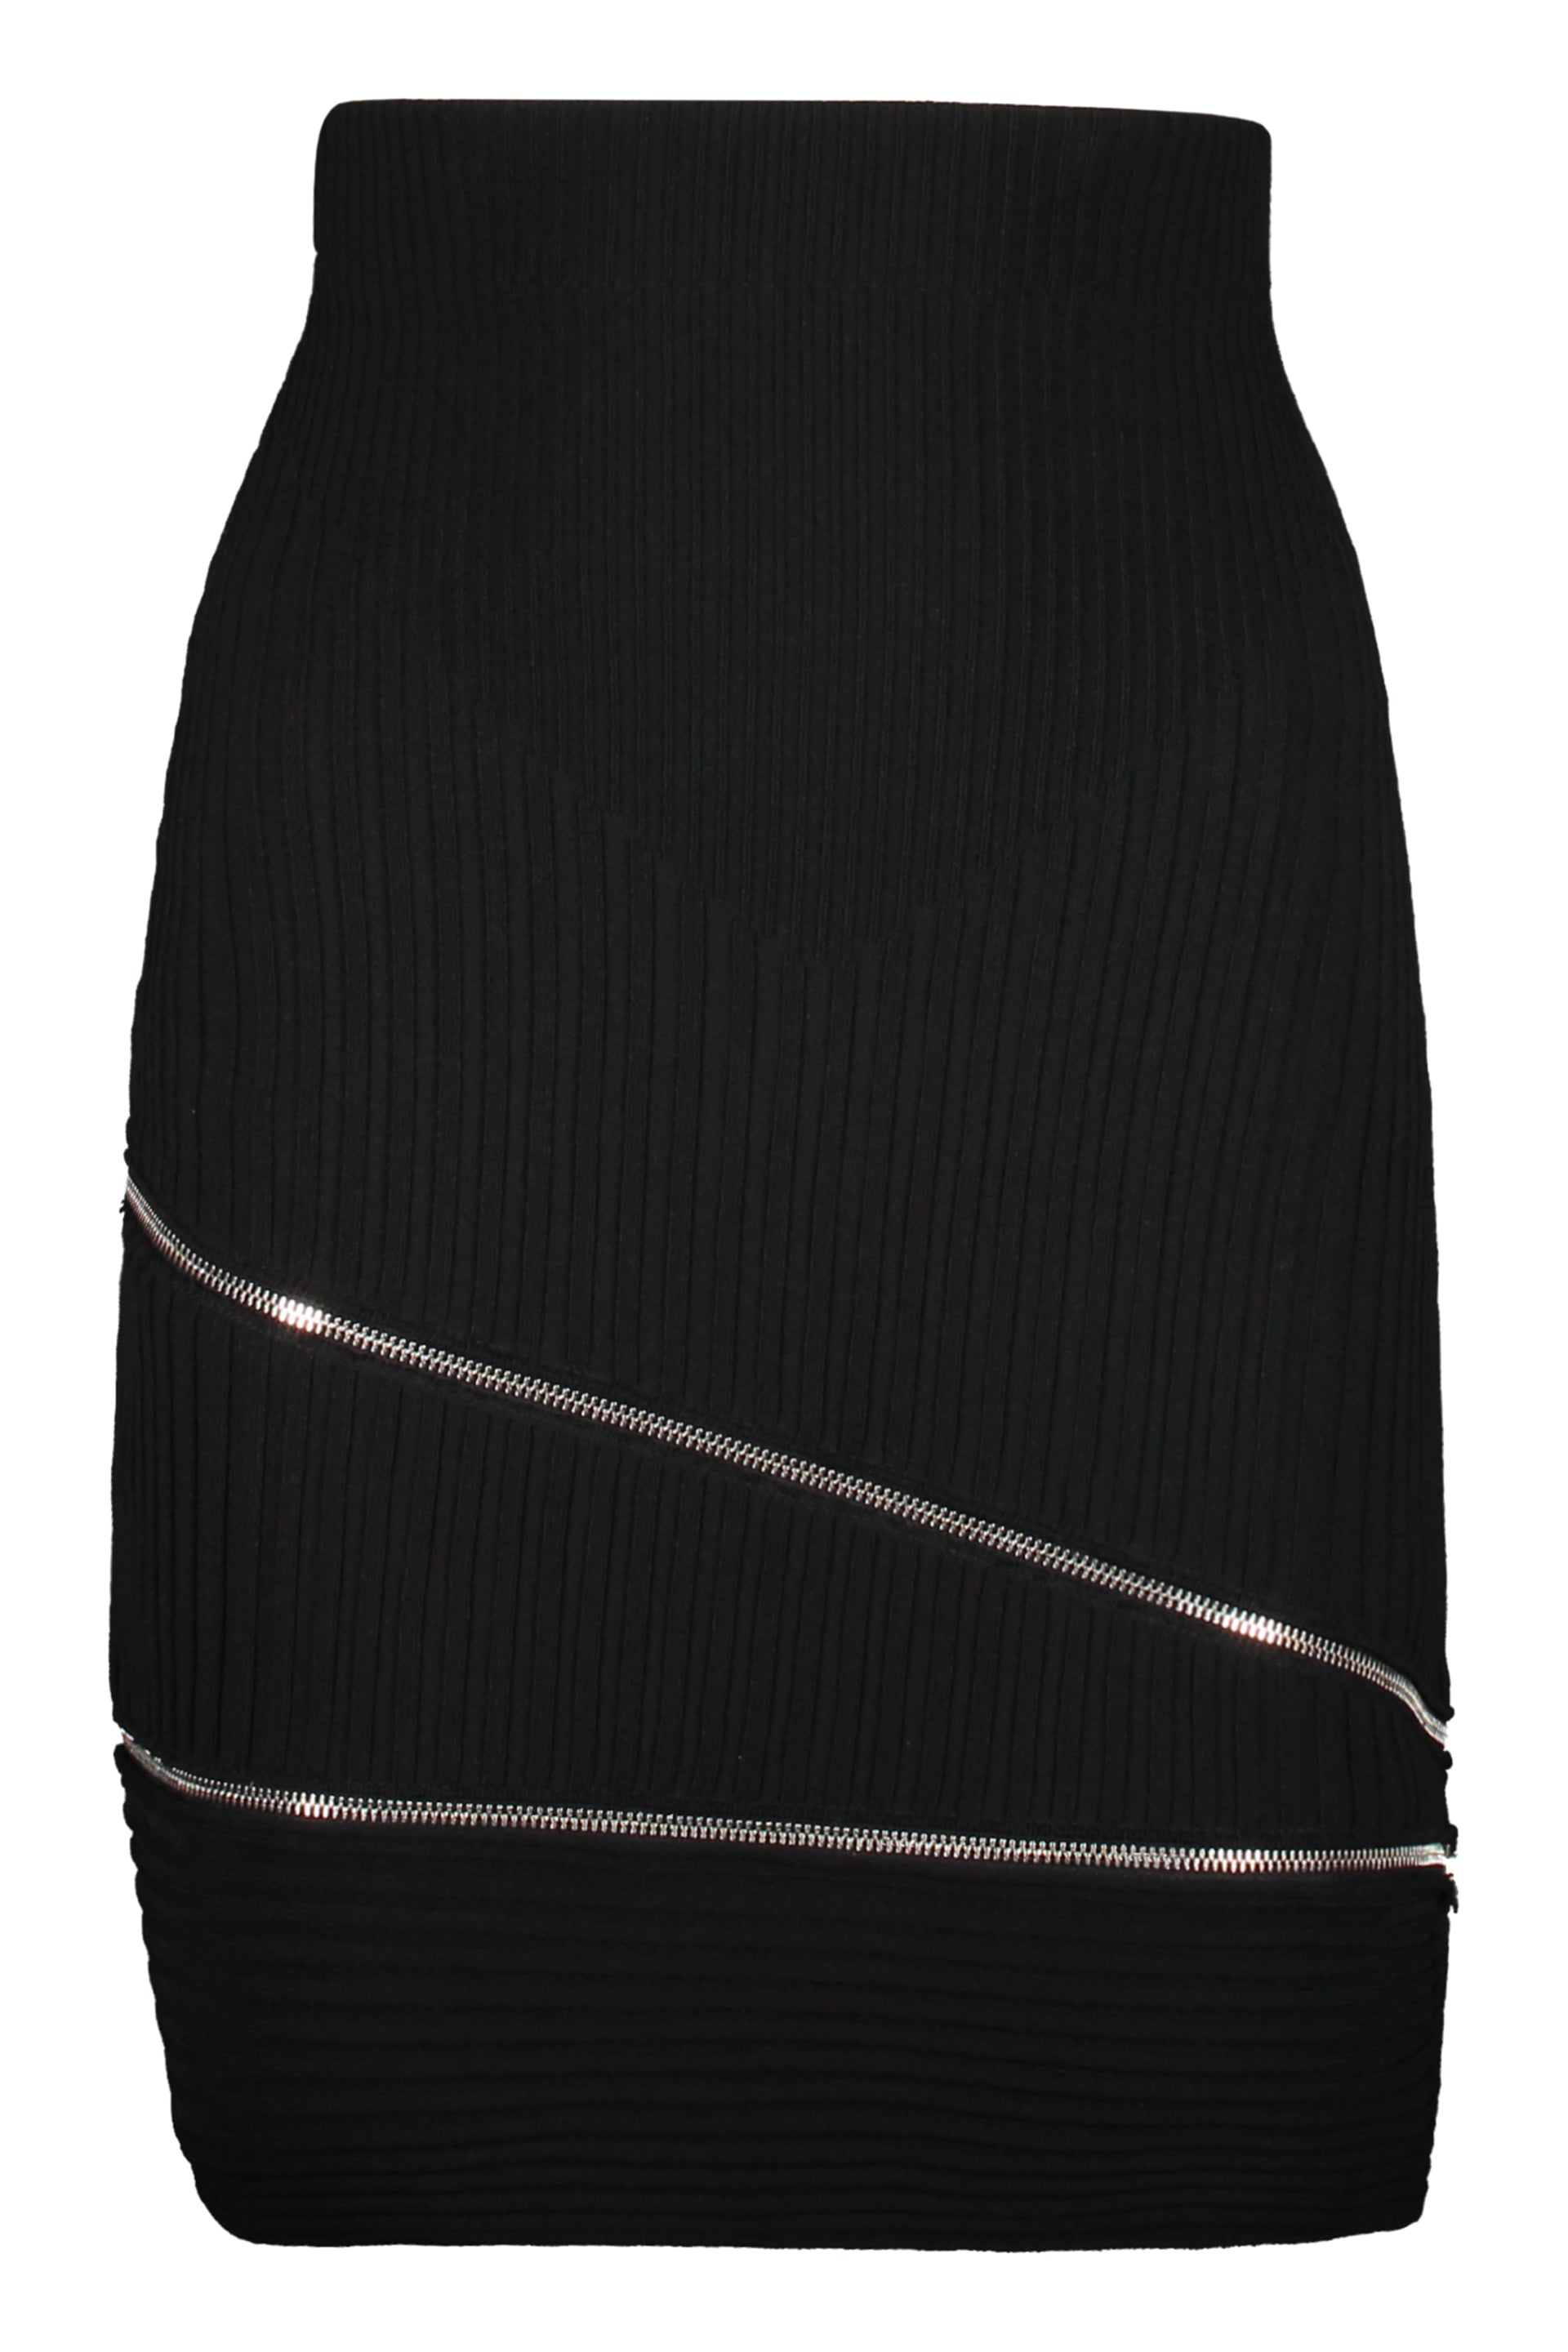 ANDREADAMO-OUTLET-SALE-Knitted-mini-skirt-Kleider-Rocke-M-ARCHIVE-COLLECTION_4f9f27e7-84f8-4b5d-ad51-7a75f44028e5.jpg